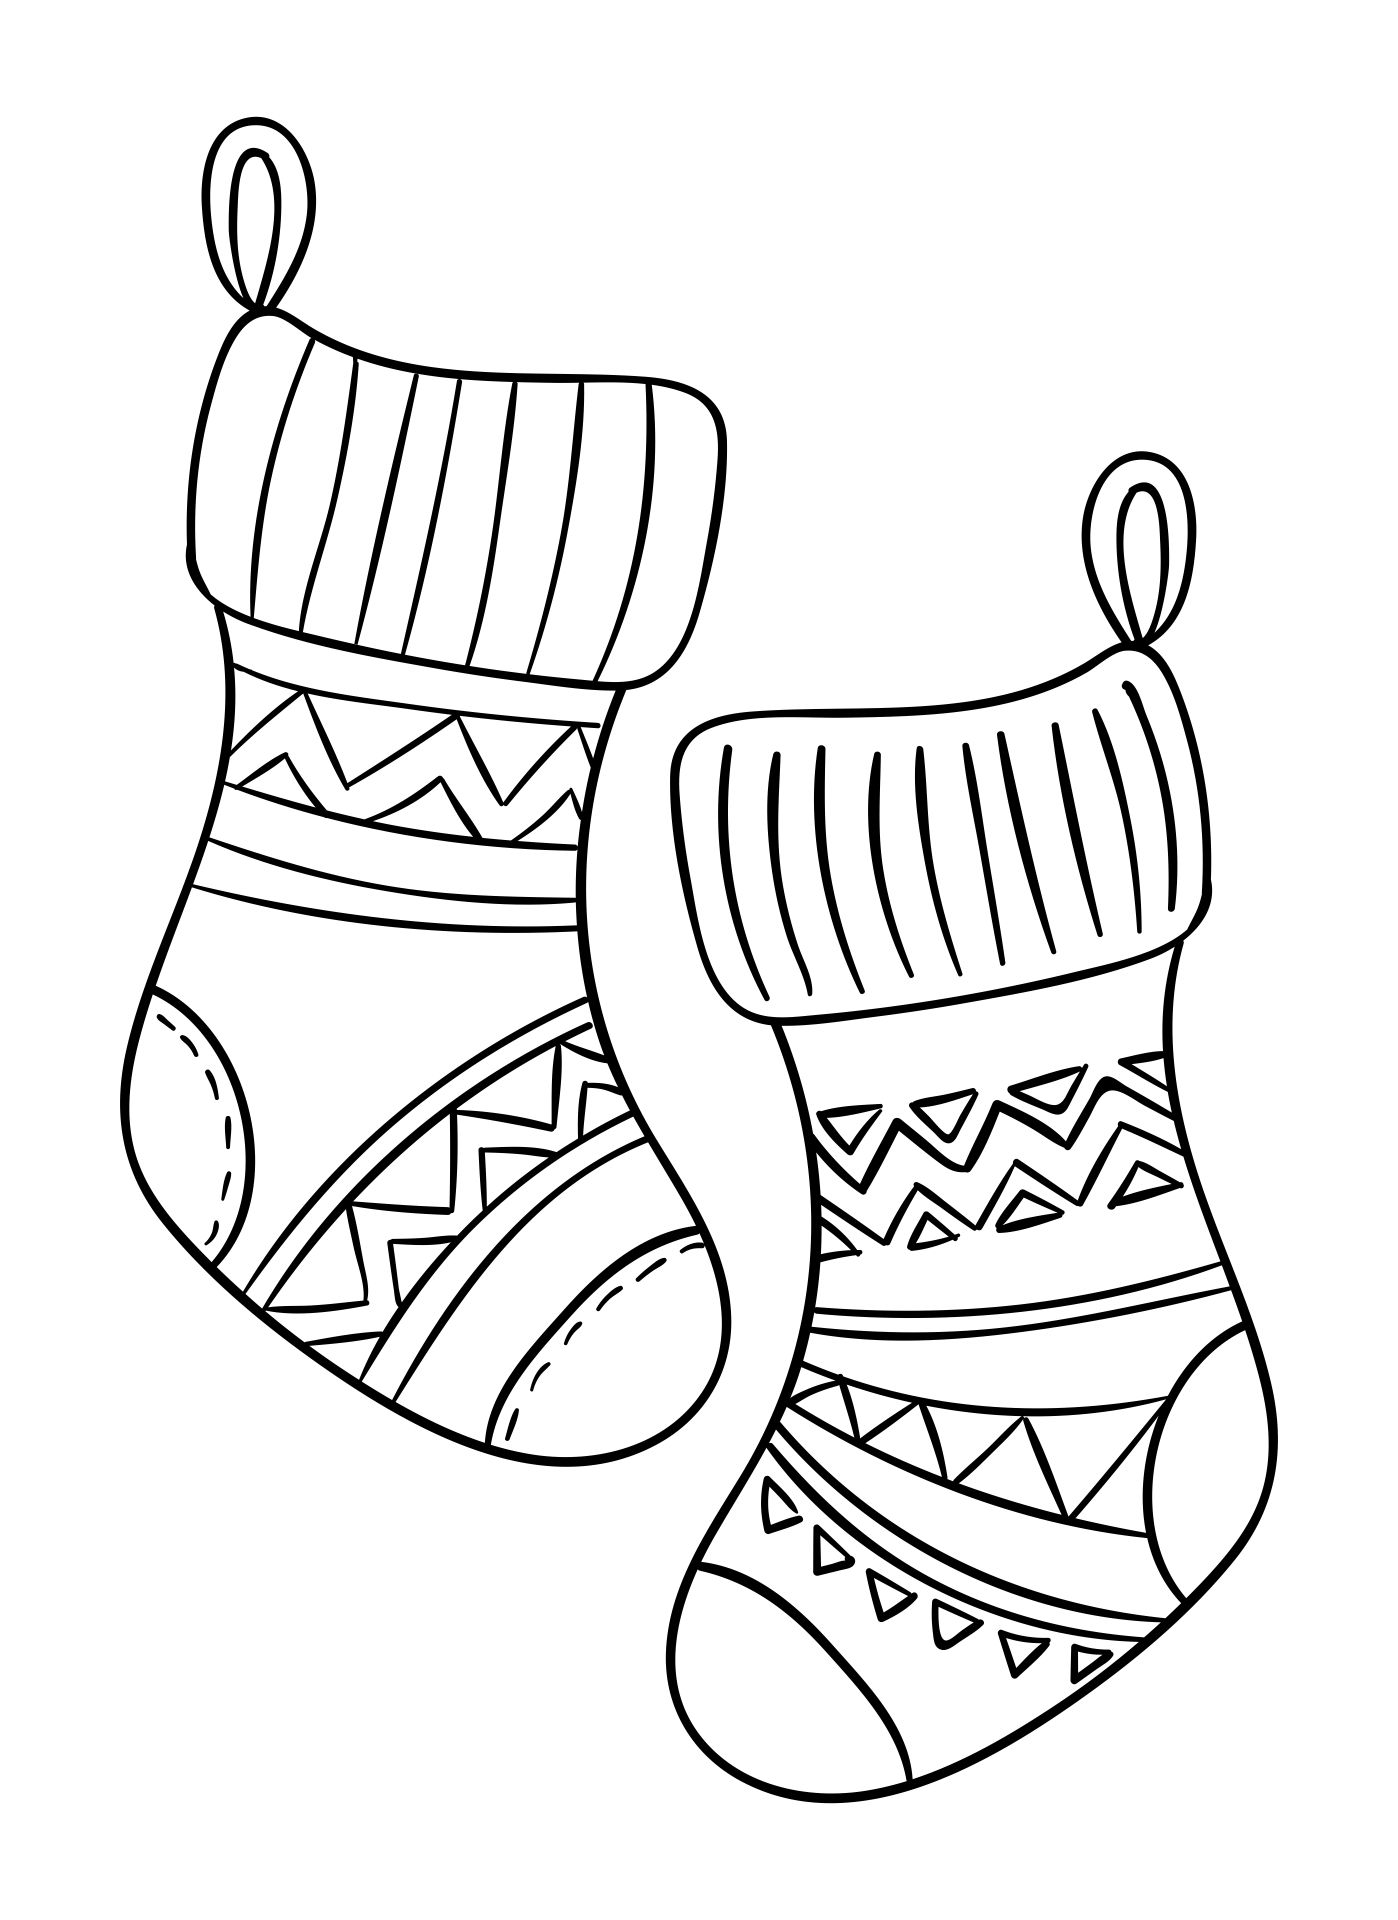 15 Best Christmas Stocking Coloring Pages Printable PDF For Free At Printablee